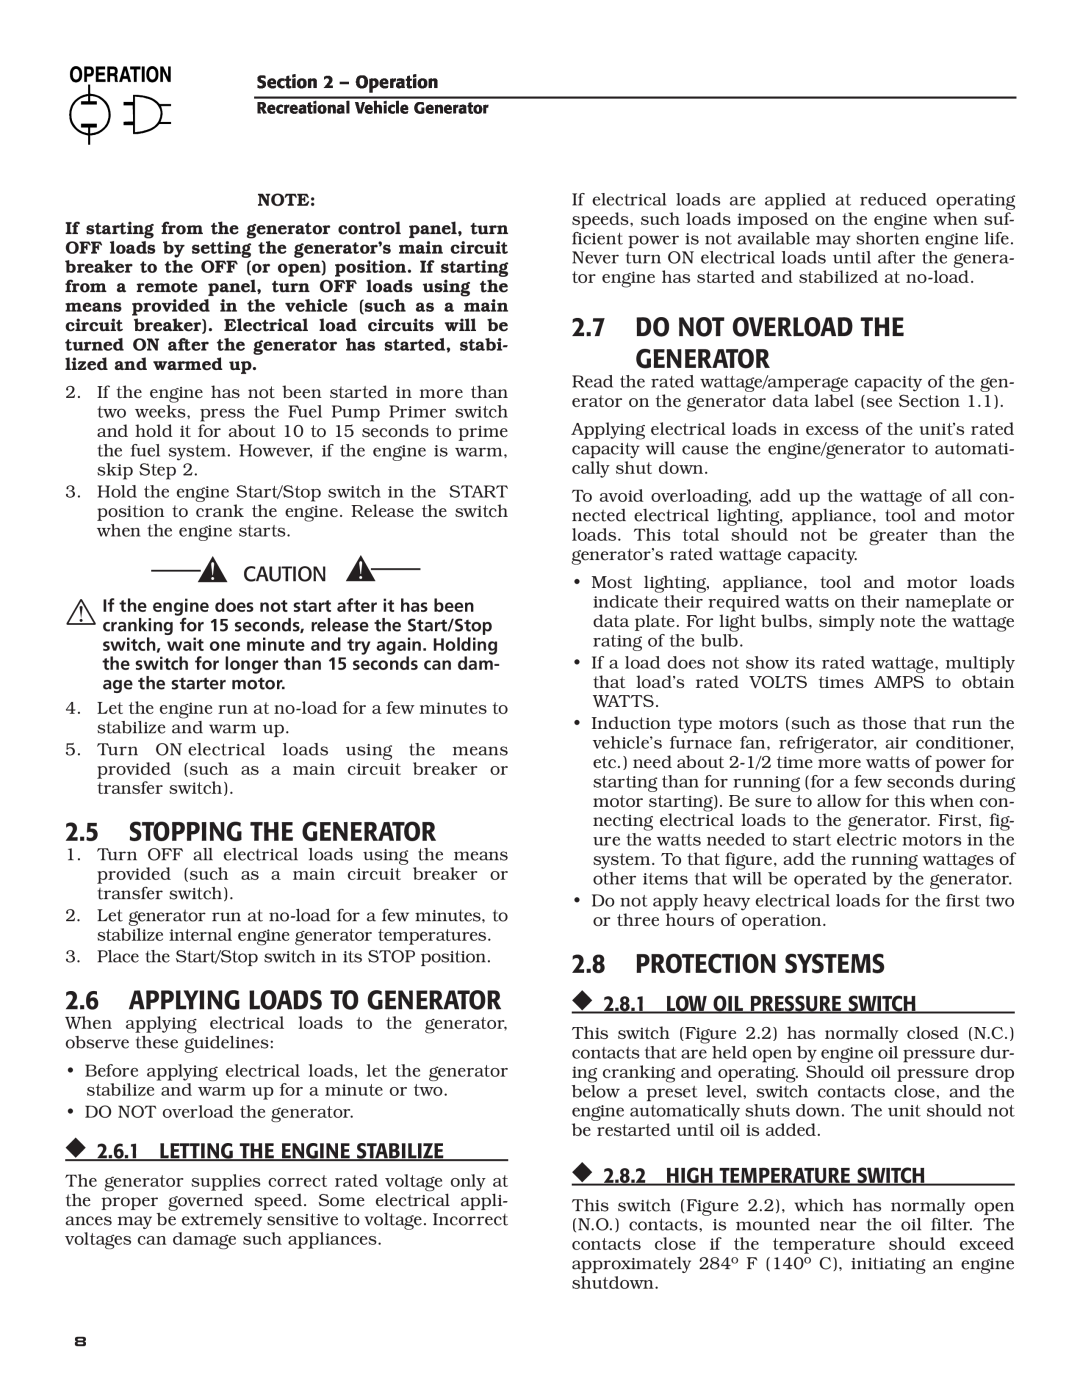 Guardian Technologies 004701-0 2.5stopping the generator, 2.7do not overload the generator, 2.8Protection Systems 